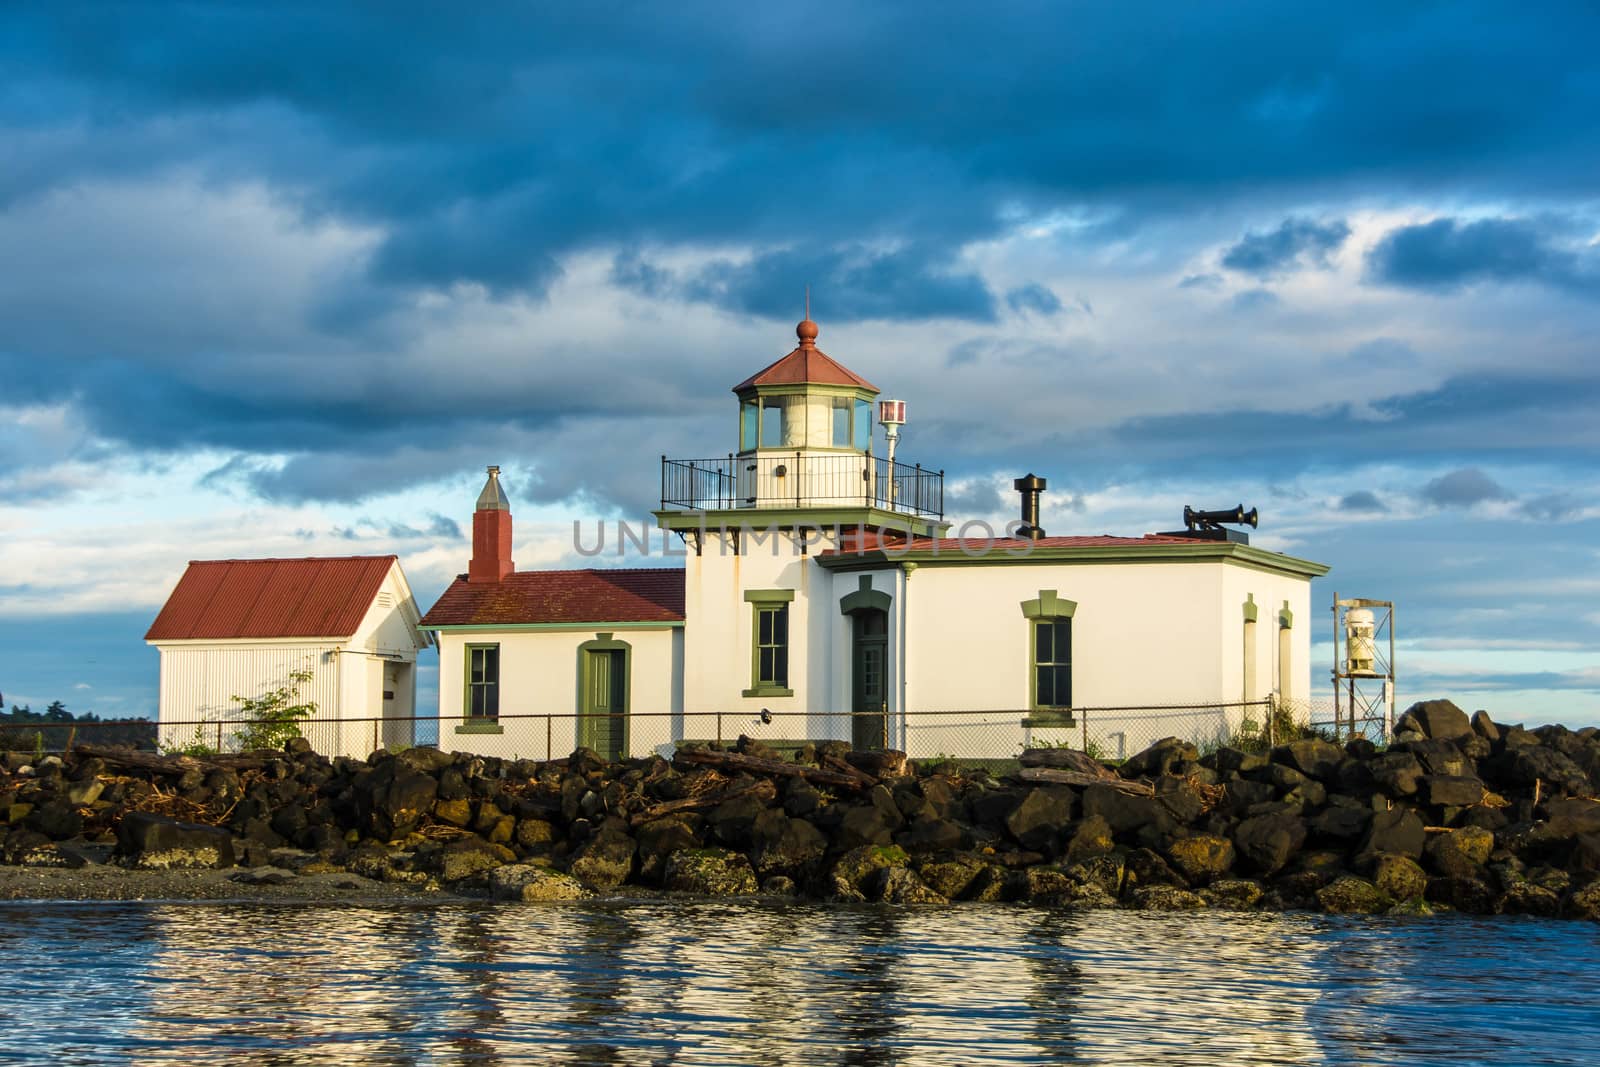 West Point Lighthouse, situated  in Discovery Park at the entrance to Seattle's Elliott Bay